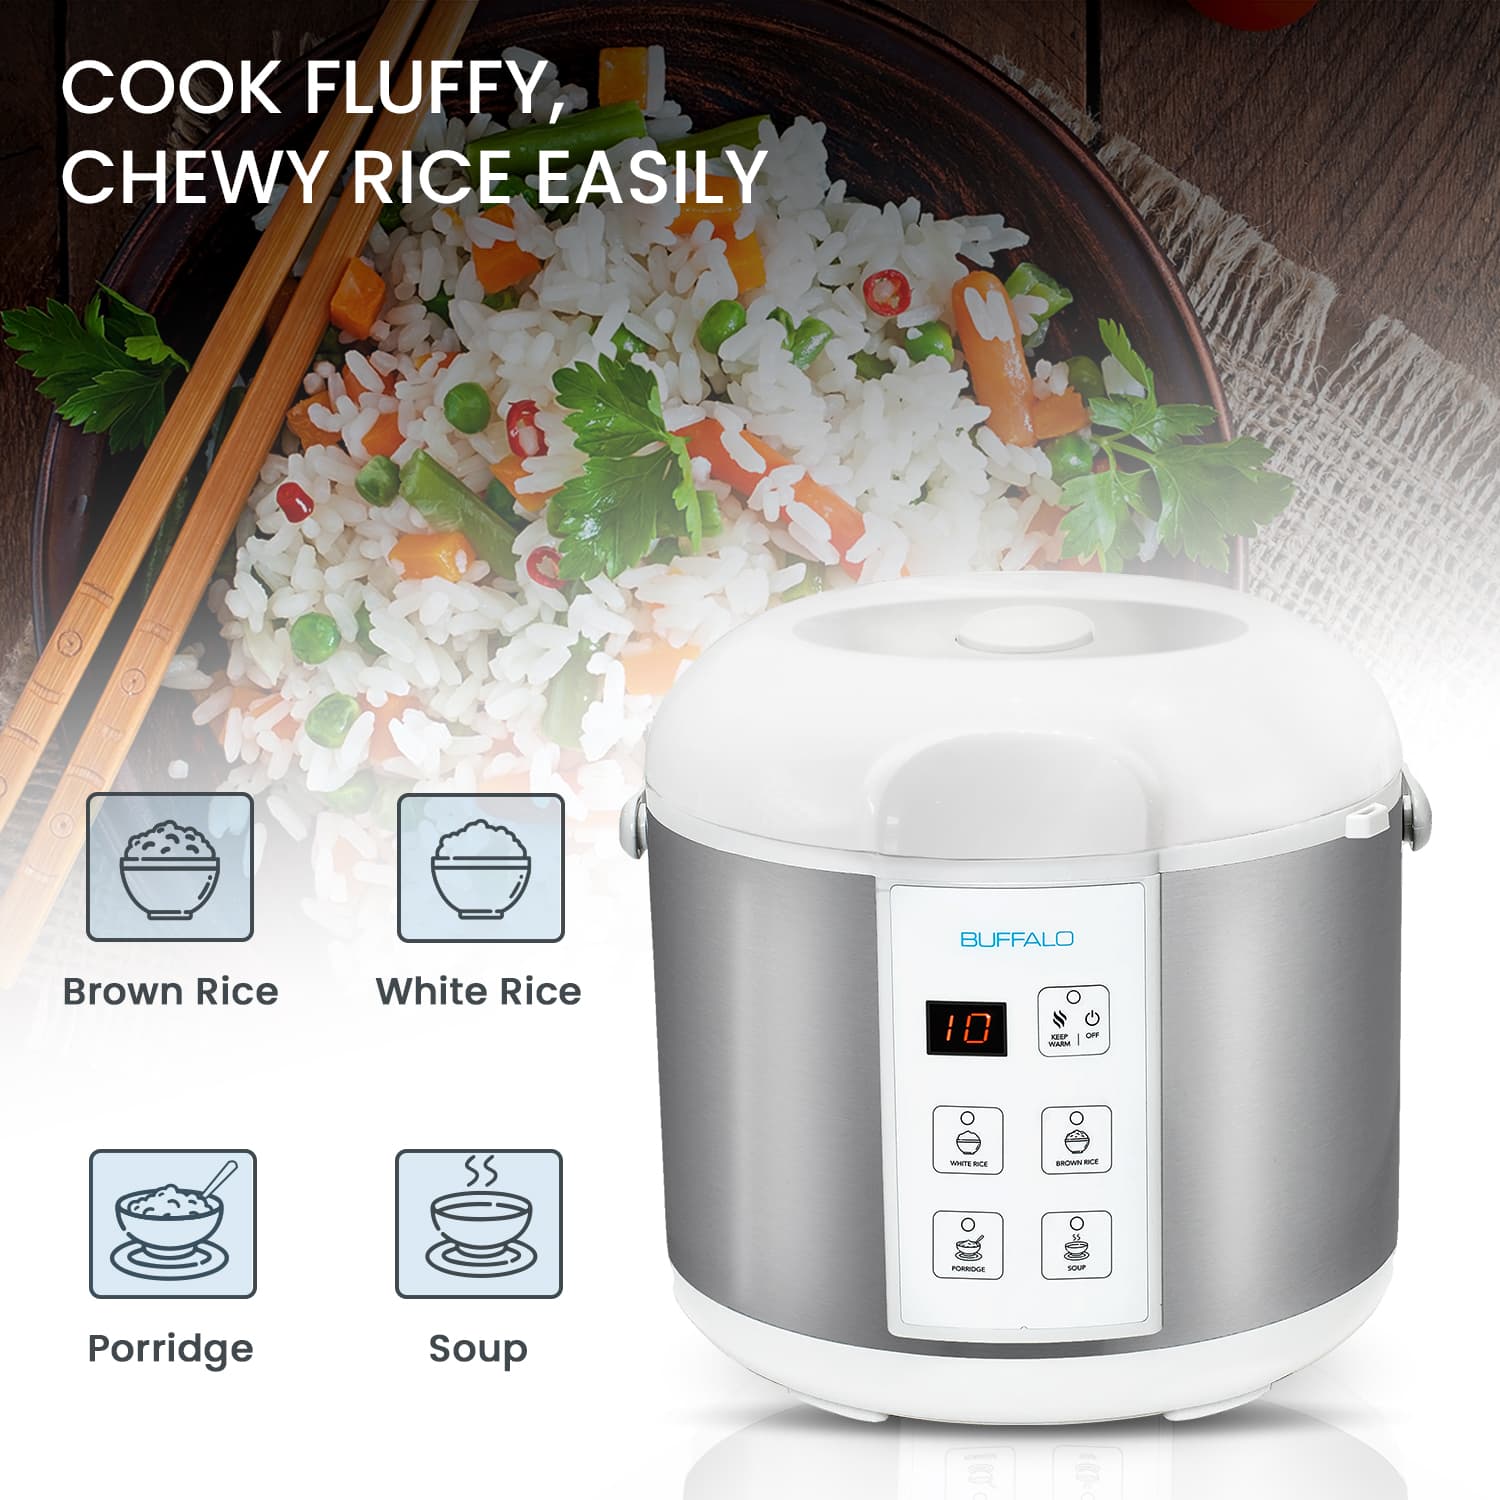 https://www.buffalocookware.com/content/files/images/Product%20page%20design/01%20Rice%20Cooker/KWBSC-II/KWBSC10-II/EG/KW-BSC%20Classic%20Cooker_1.0L_Product_2023_03%20EG.jpg